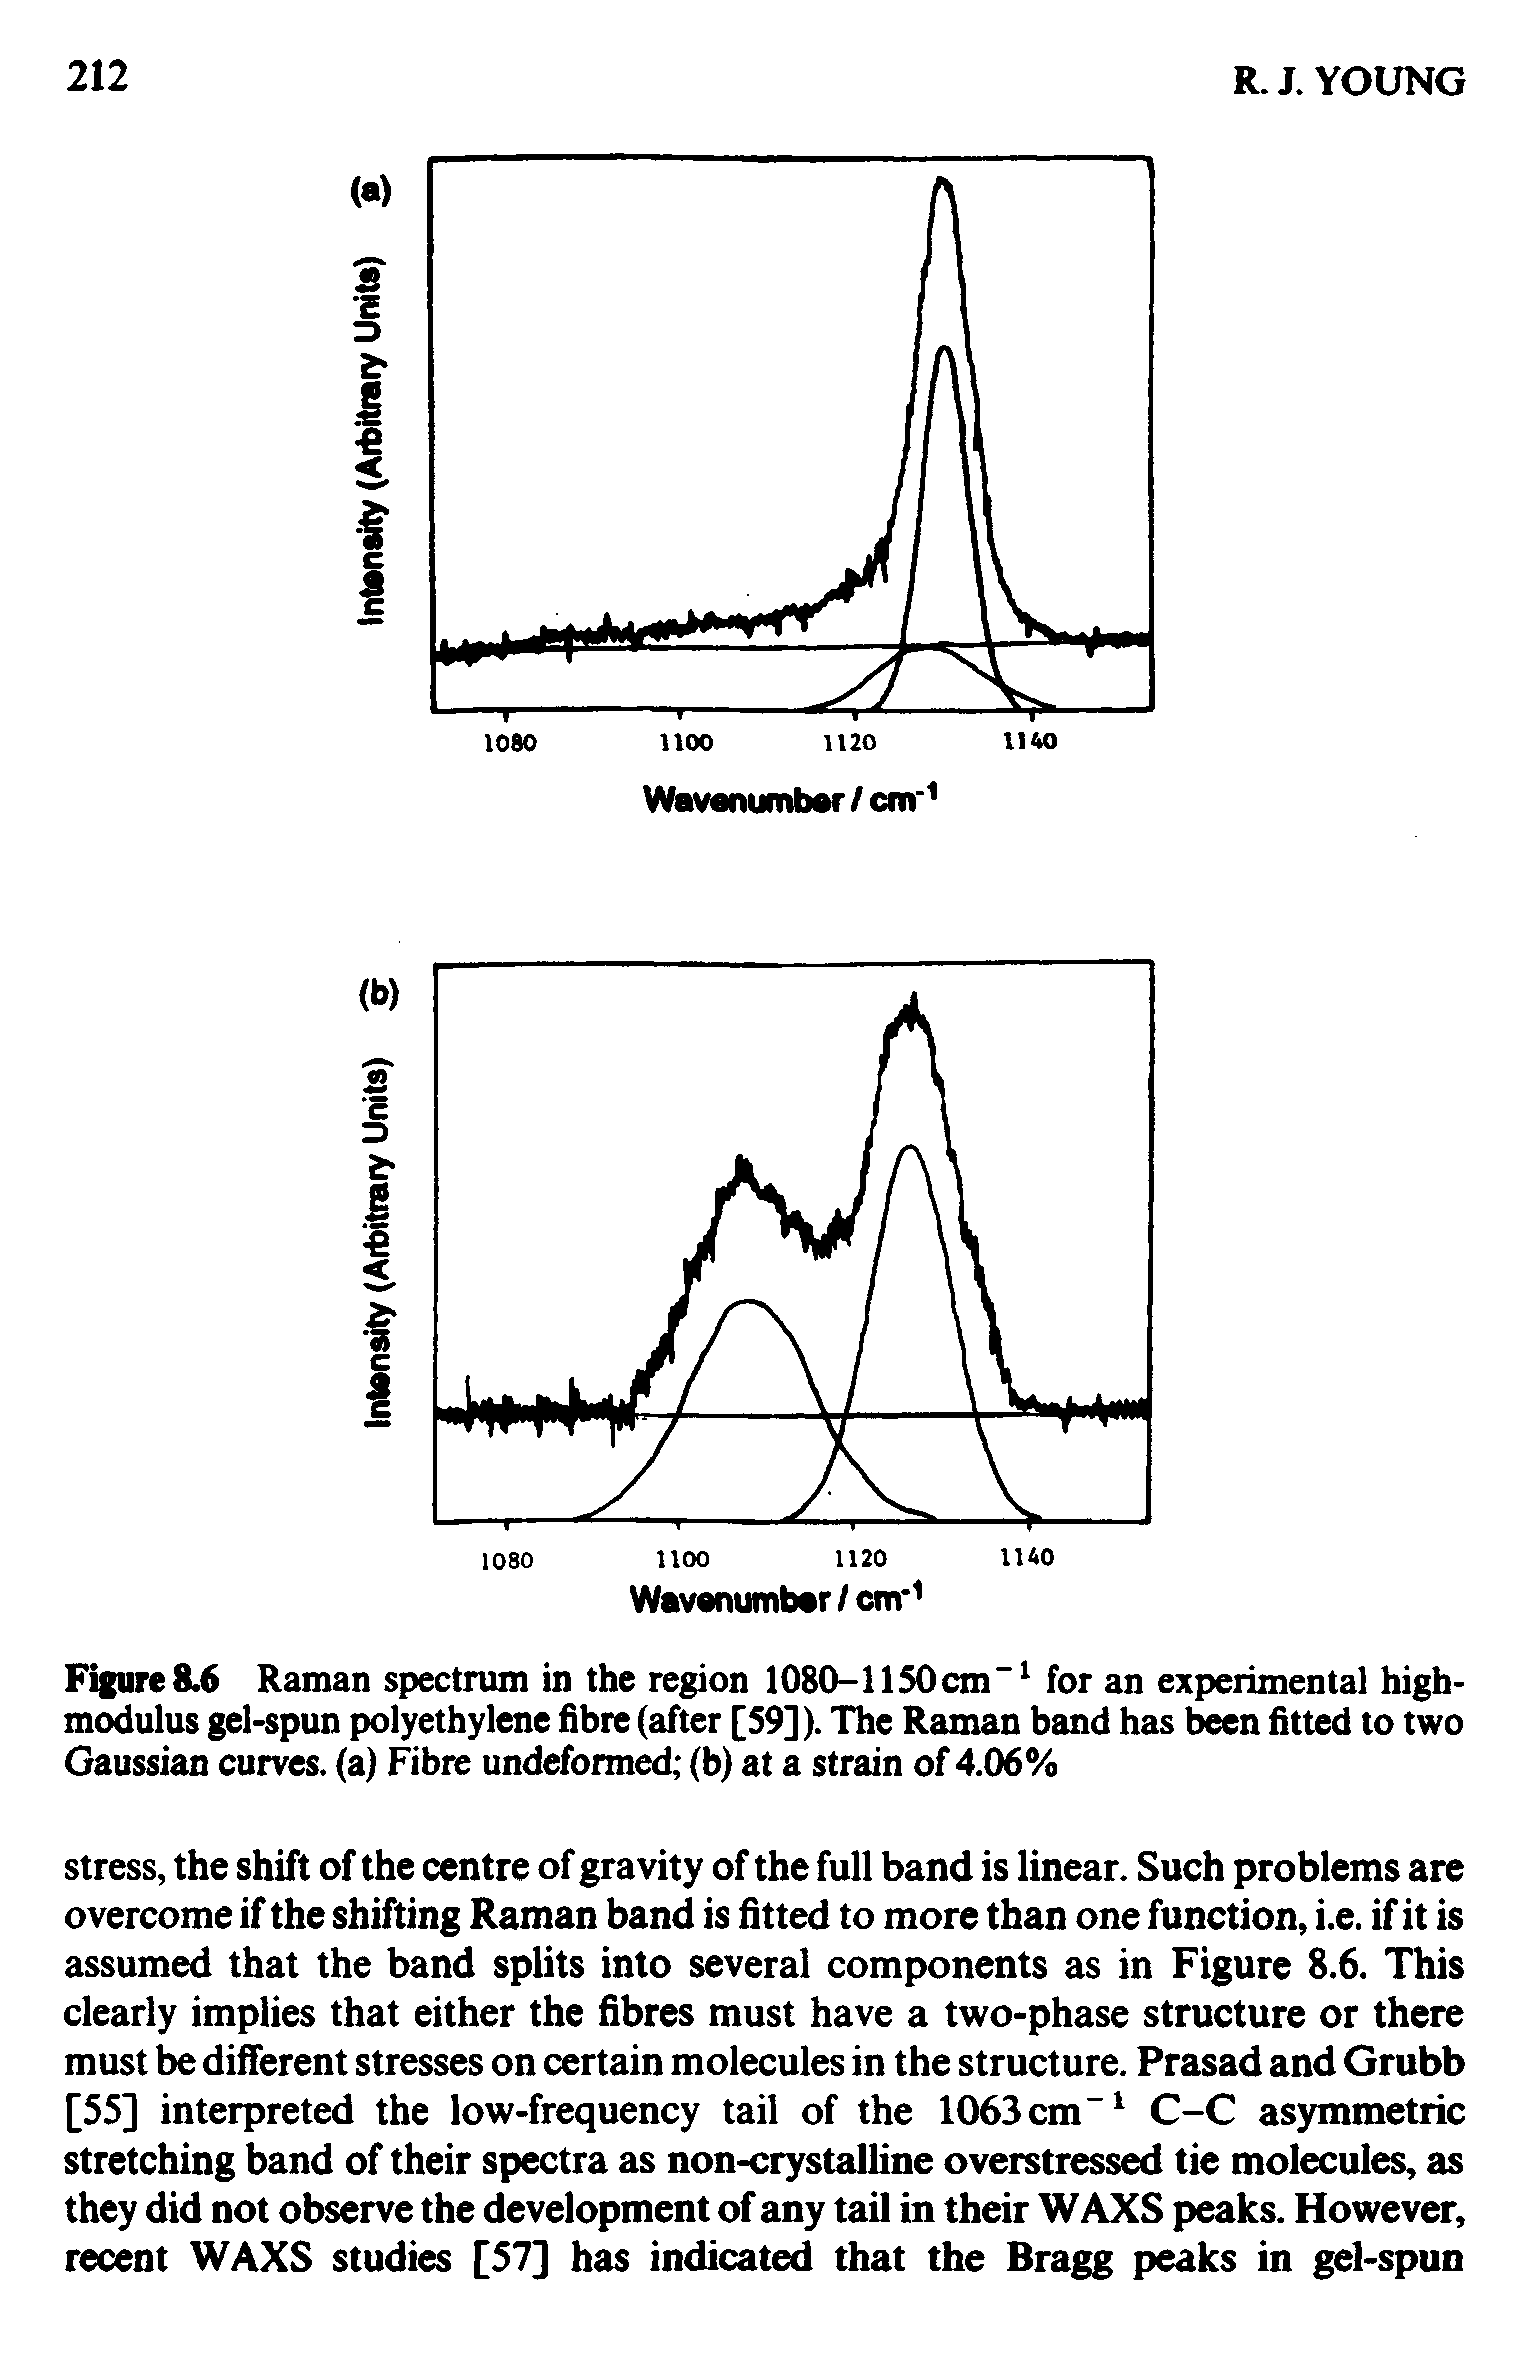 Figure8.6 Raman spectrum in the region 1080-1 lS0cm for an experimental high-m ulus gel-spun polyethylene fibre (after [S9]). The Raman band has been fitted to two Gaussian curves, (a) Fibre undeformed (b) at a strain of 4.06%...